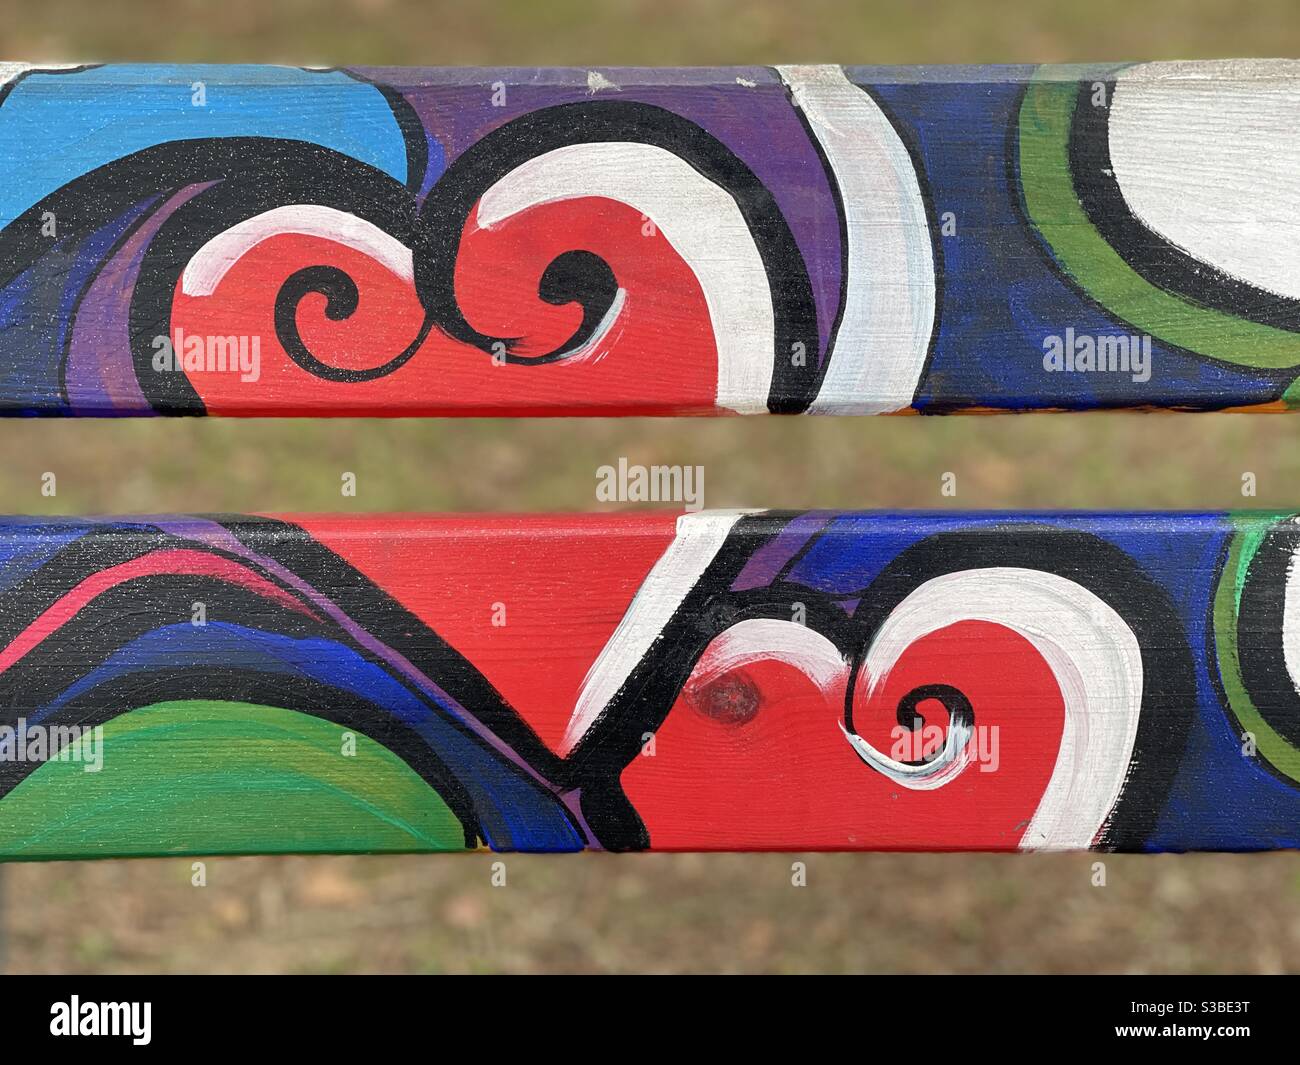 Creative urban art design with two hearts painted on a public bench Stock Photo